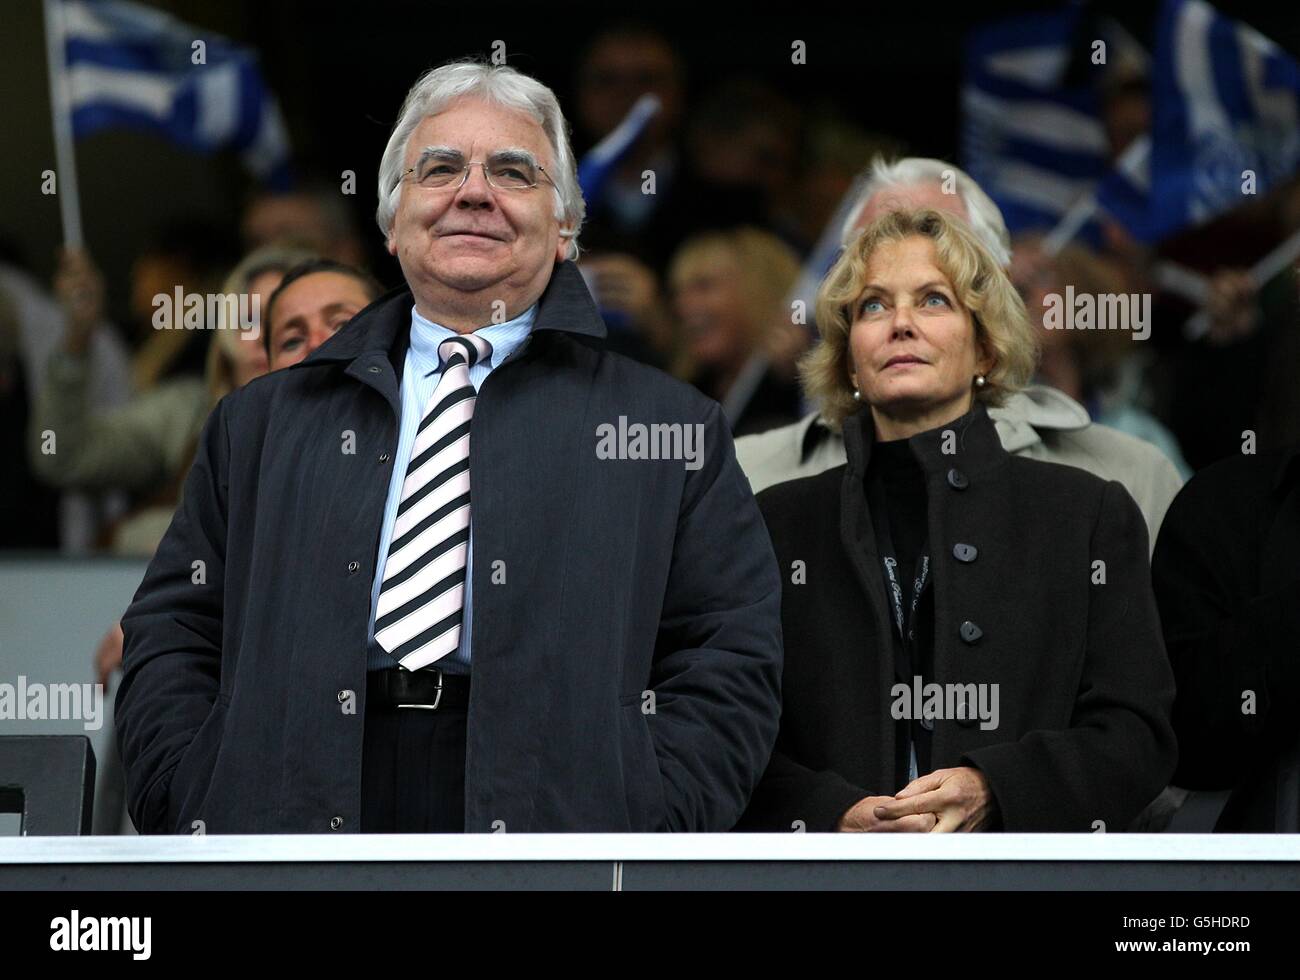 Soccer - Barclays Premier League - Queens Park Rangers v Everton - Loftus Road. Everton chairman Bill Kenwright with his partner Jenny Seagrove in the stands Stock Photo